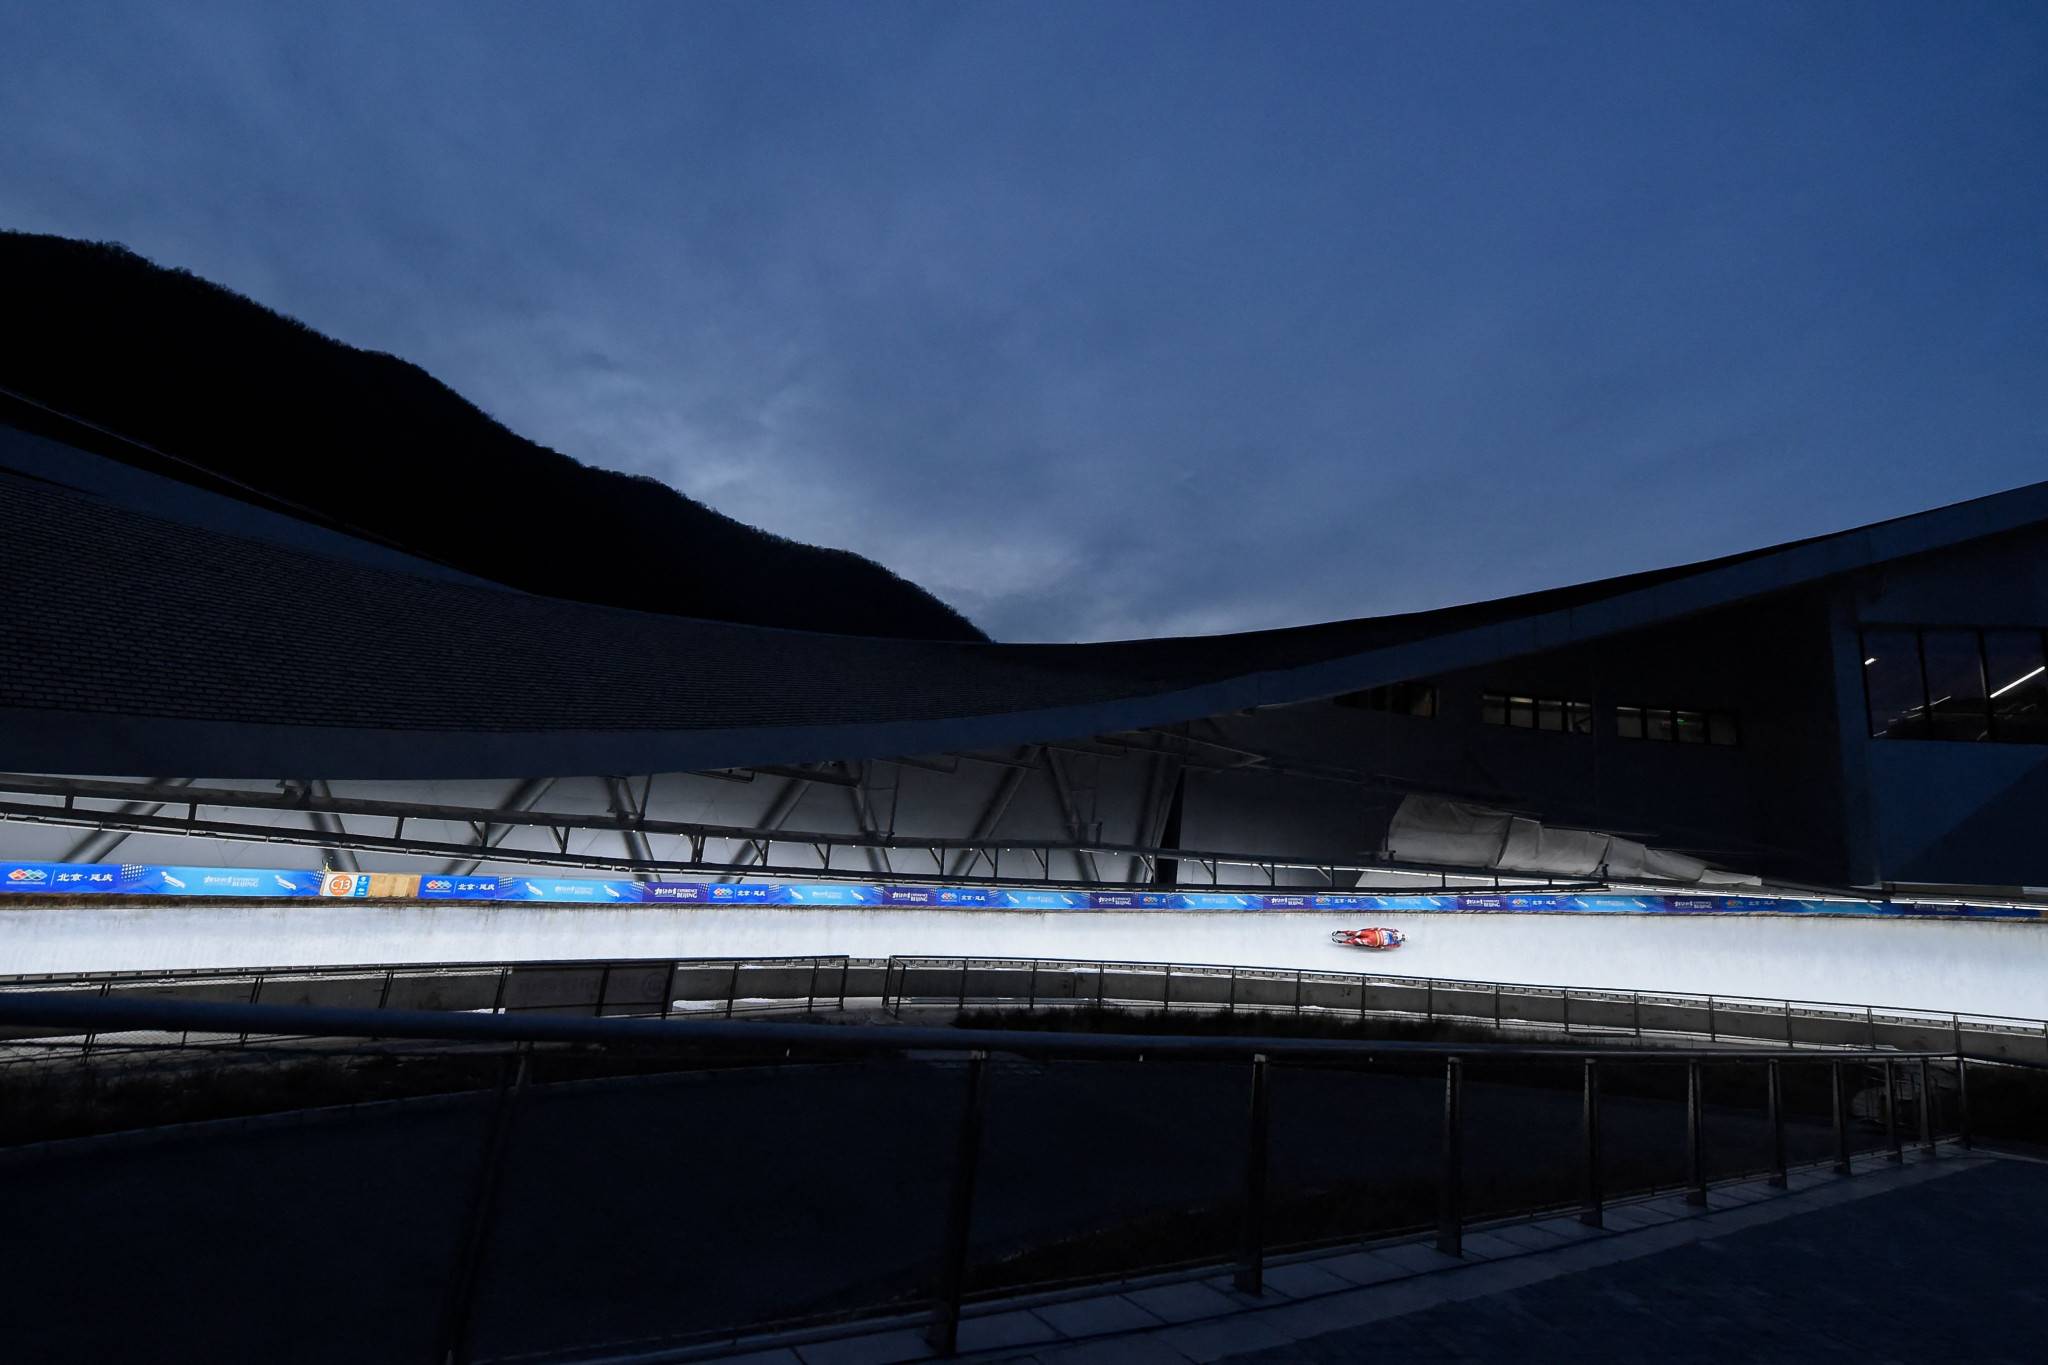 A total of 10 members of the International Luge Federation development team have qualified to compete at Beijing 2022 ©Getty Images